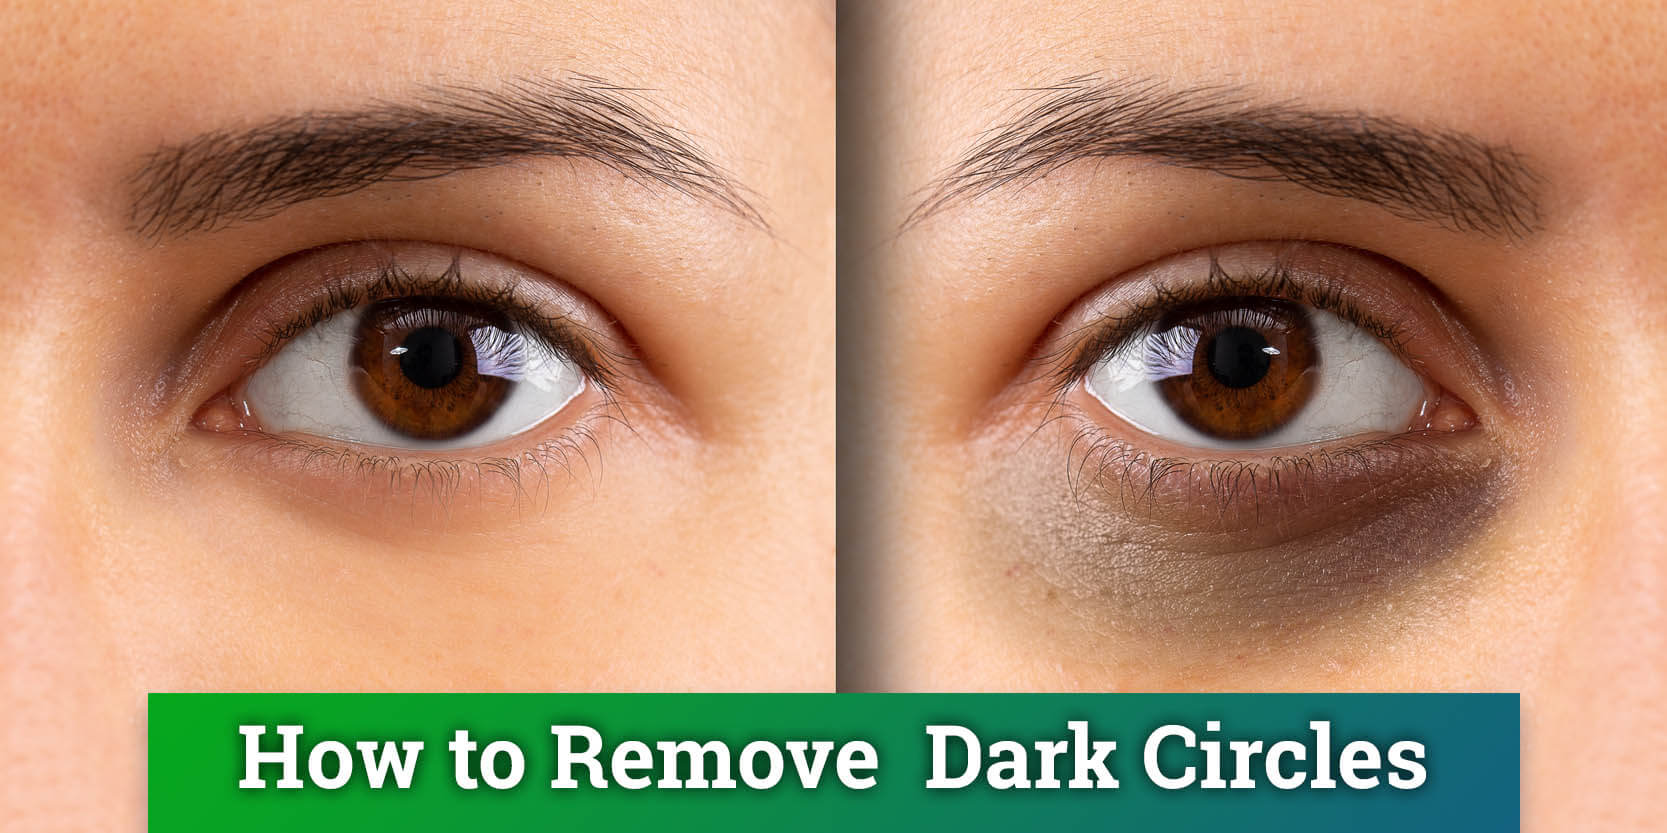 Eye Bag Removal Surgery: Procedure, Risks, Recovery